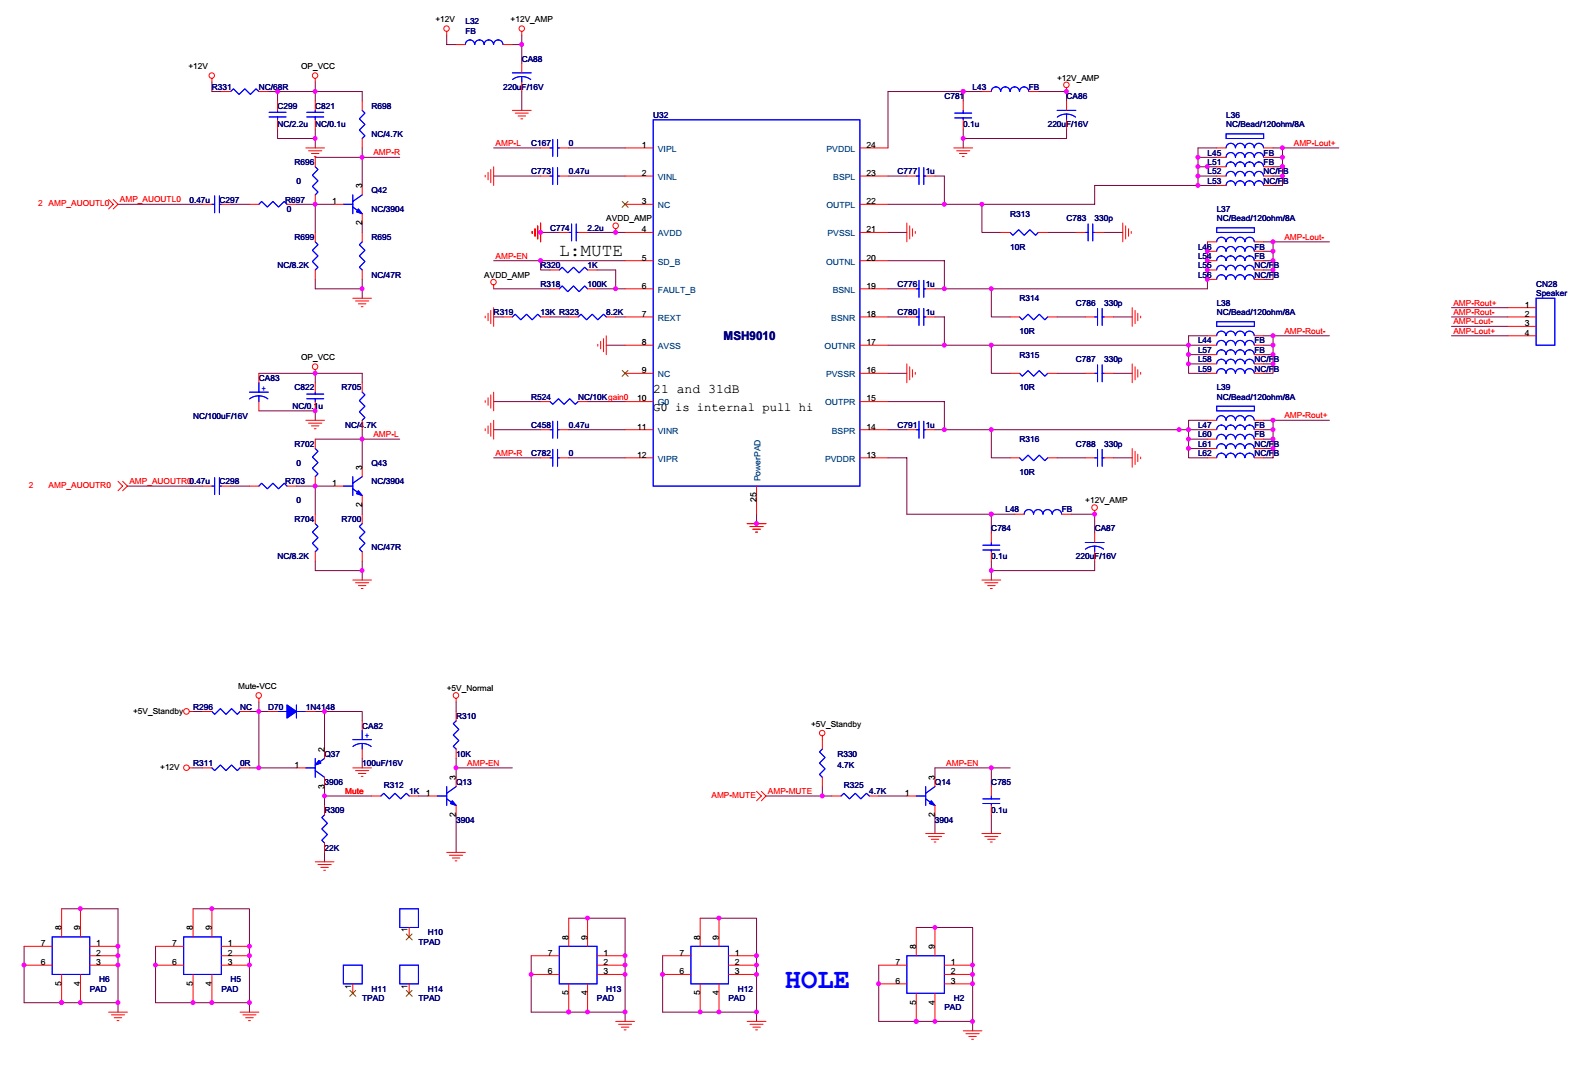 Schematic Diagrams: LE32H86 Haier LCD TV – SMPS, Audio output and T’Con